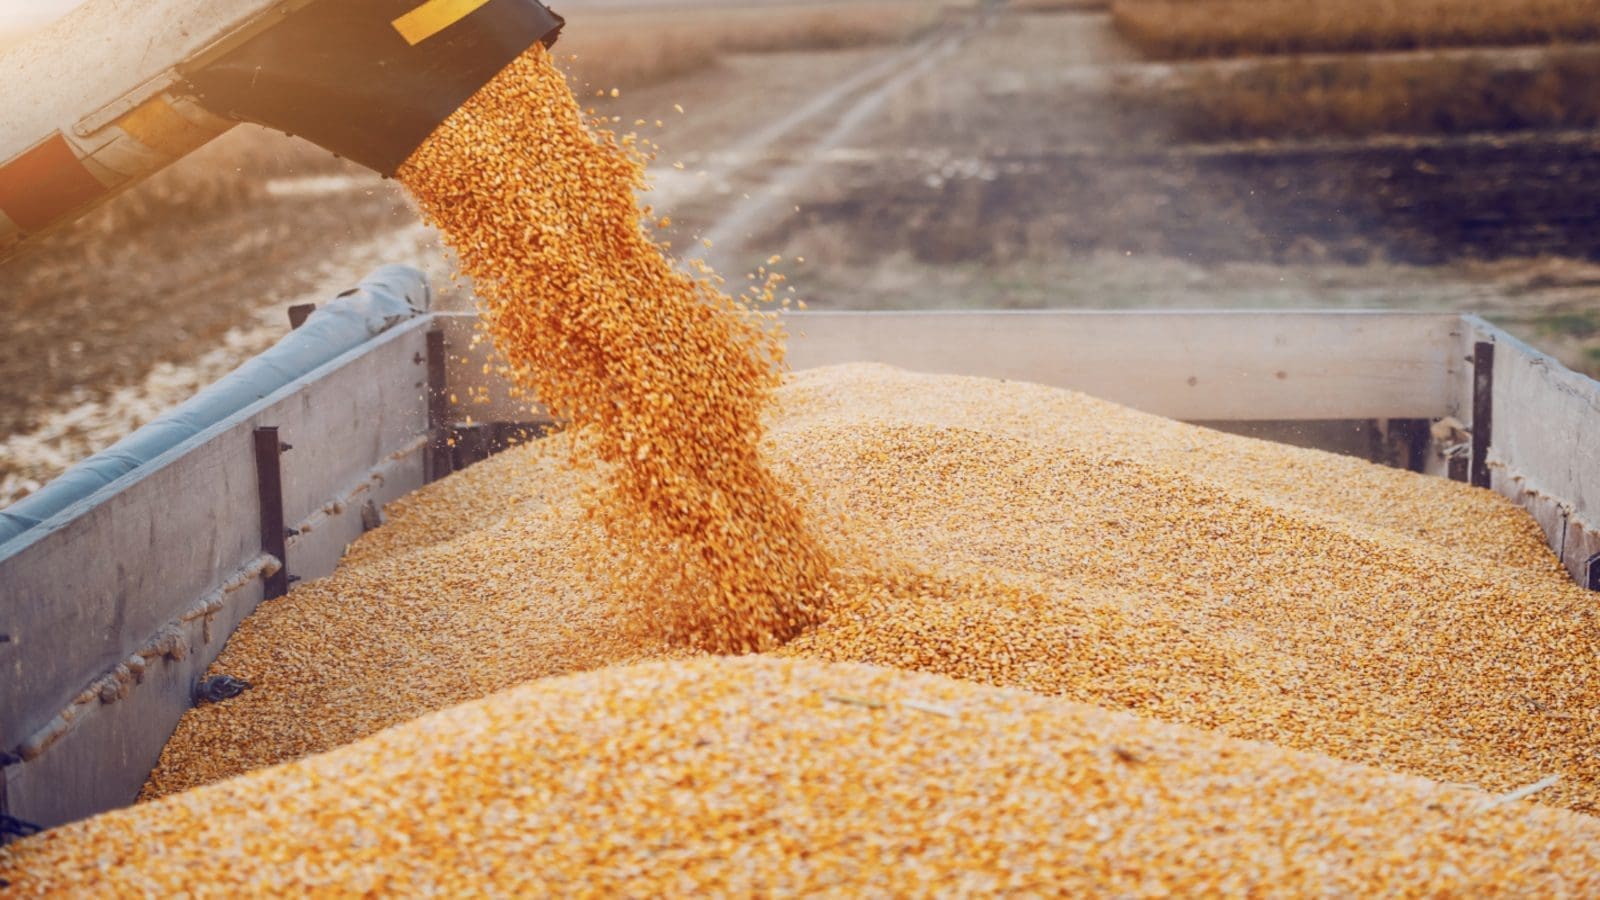 Ukraine increases grain exports to the relief of food insecure countries